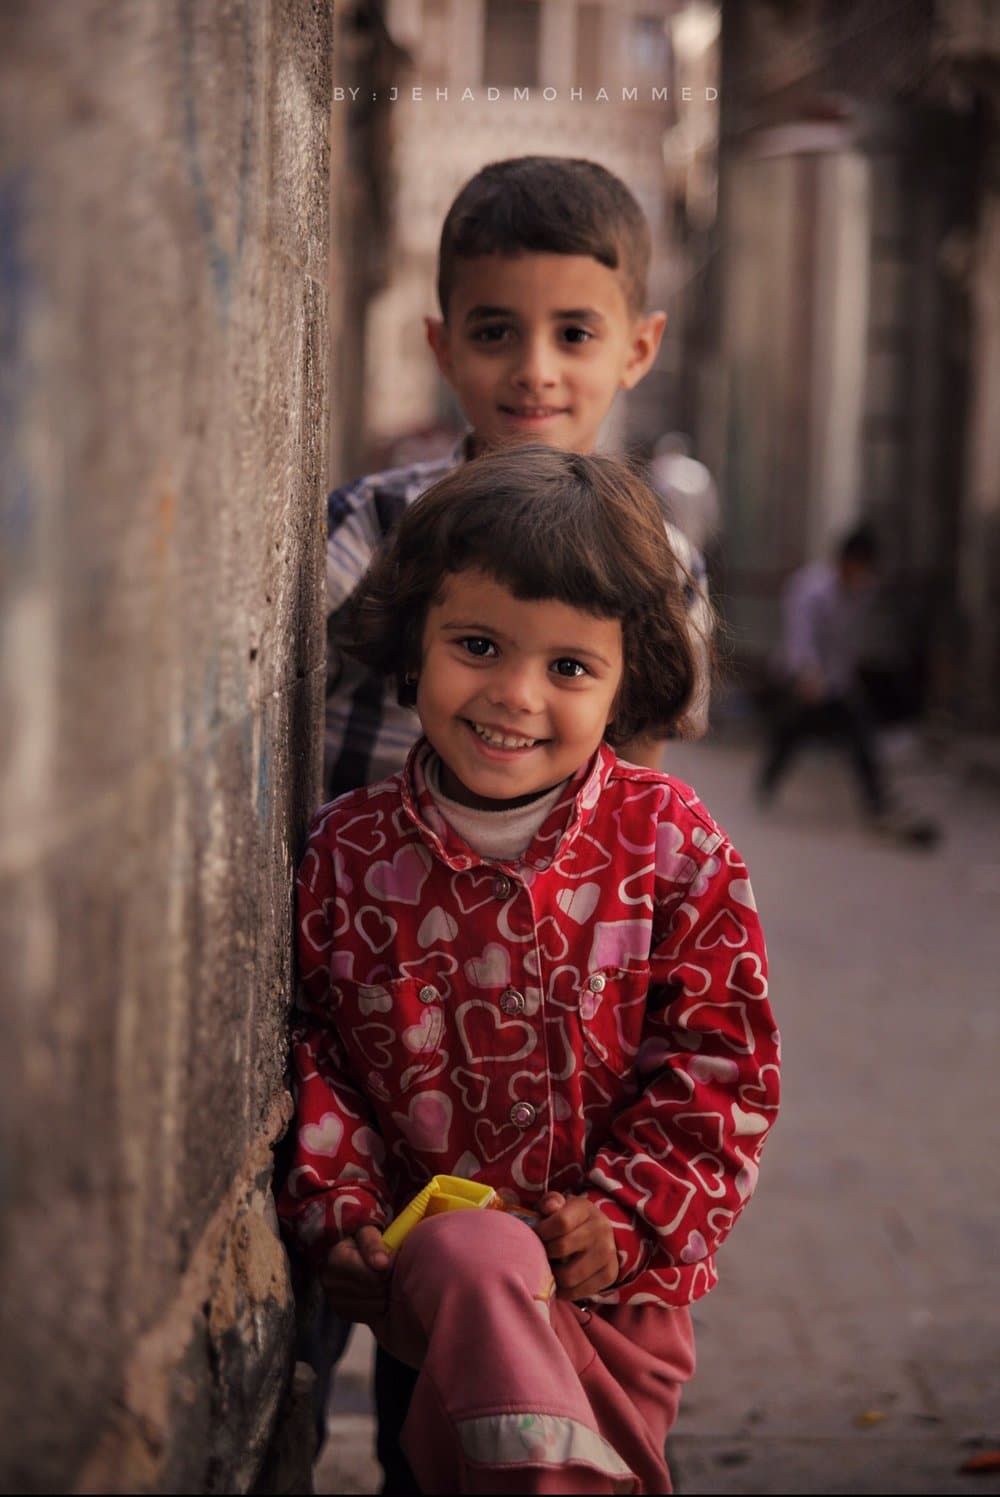 Faces of Two children in the Streets of Old Sanaa City - Jehad